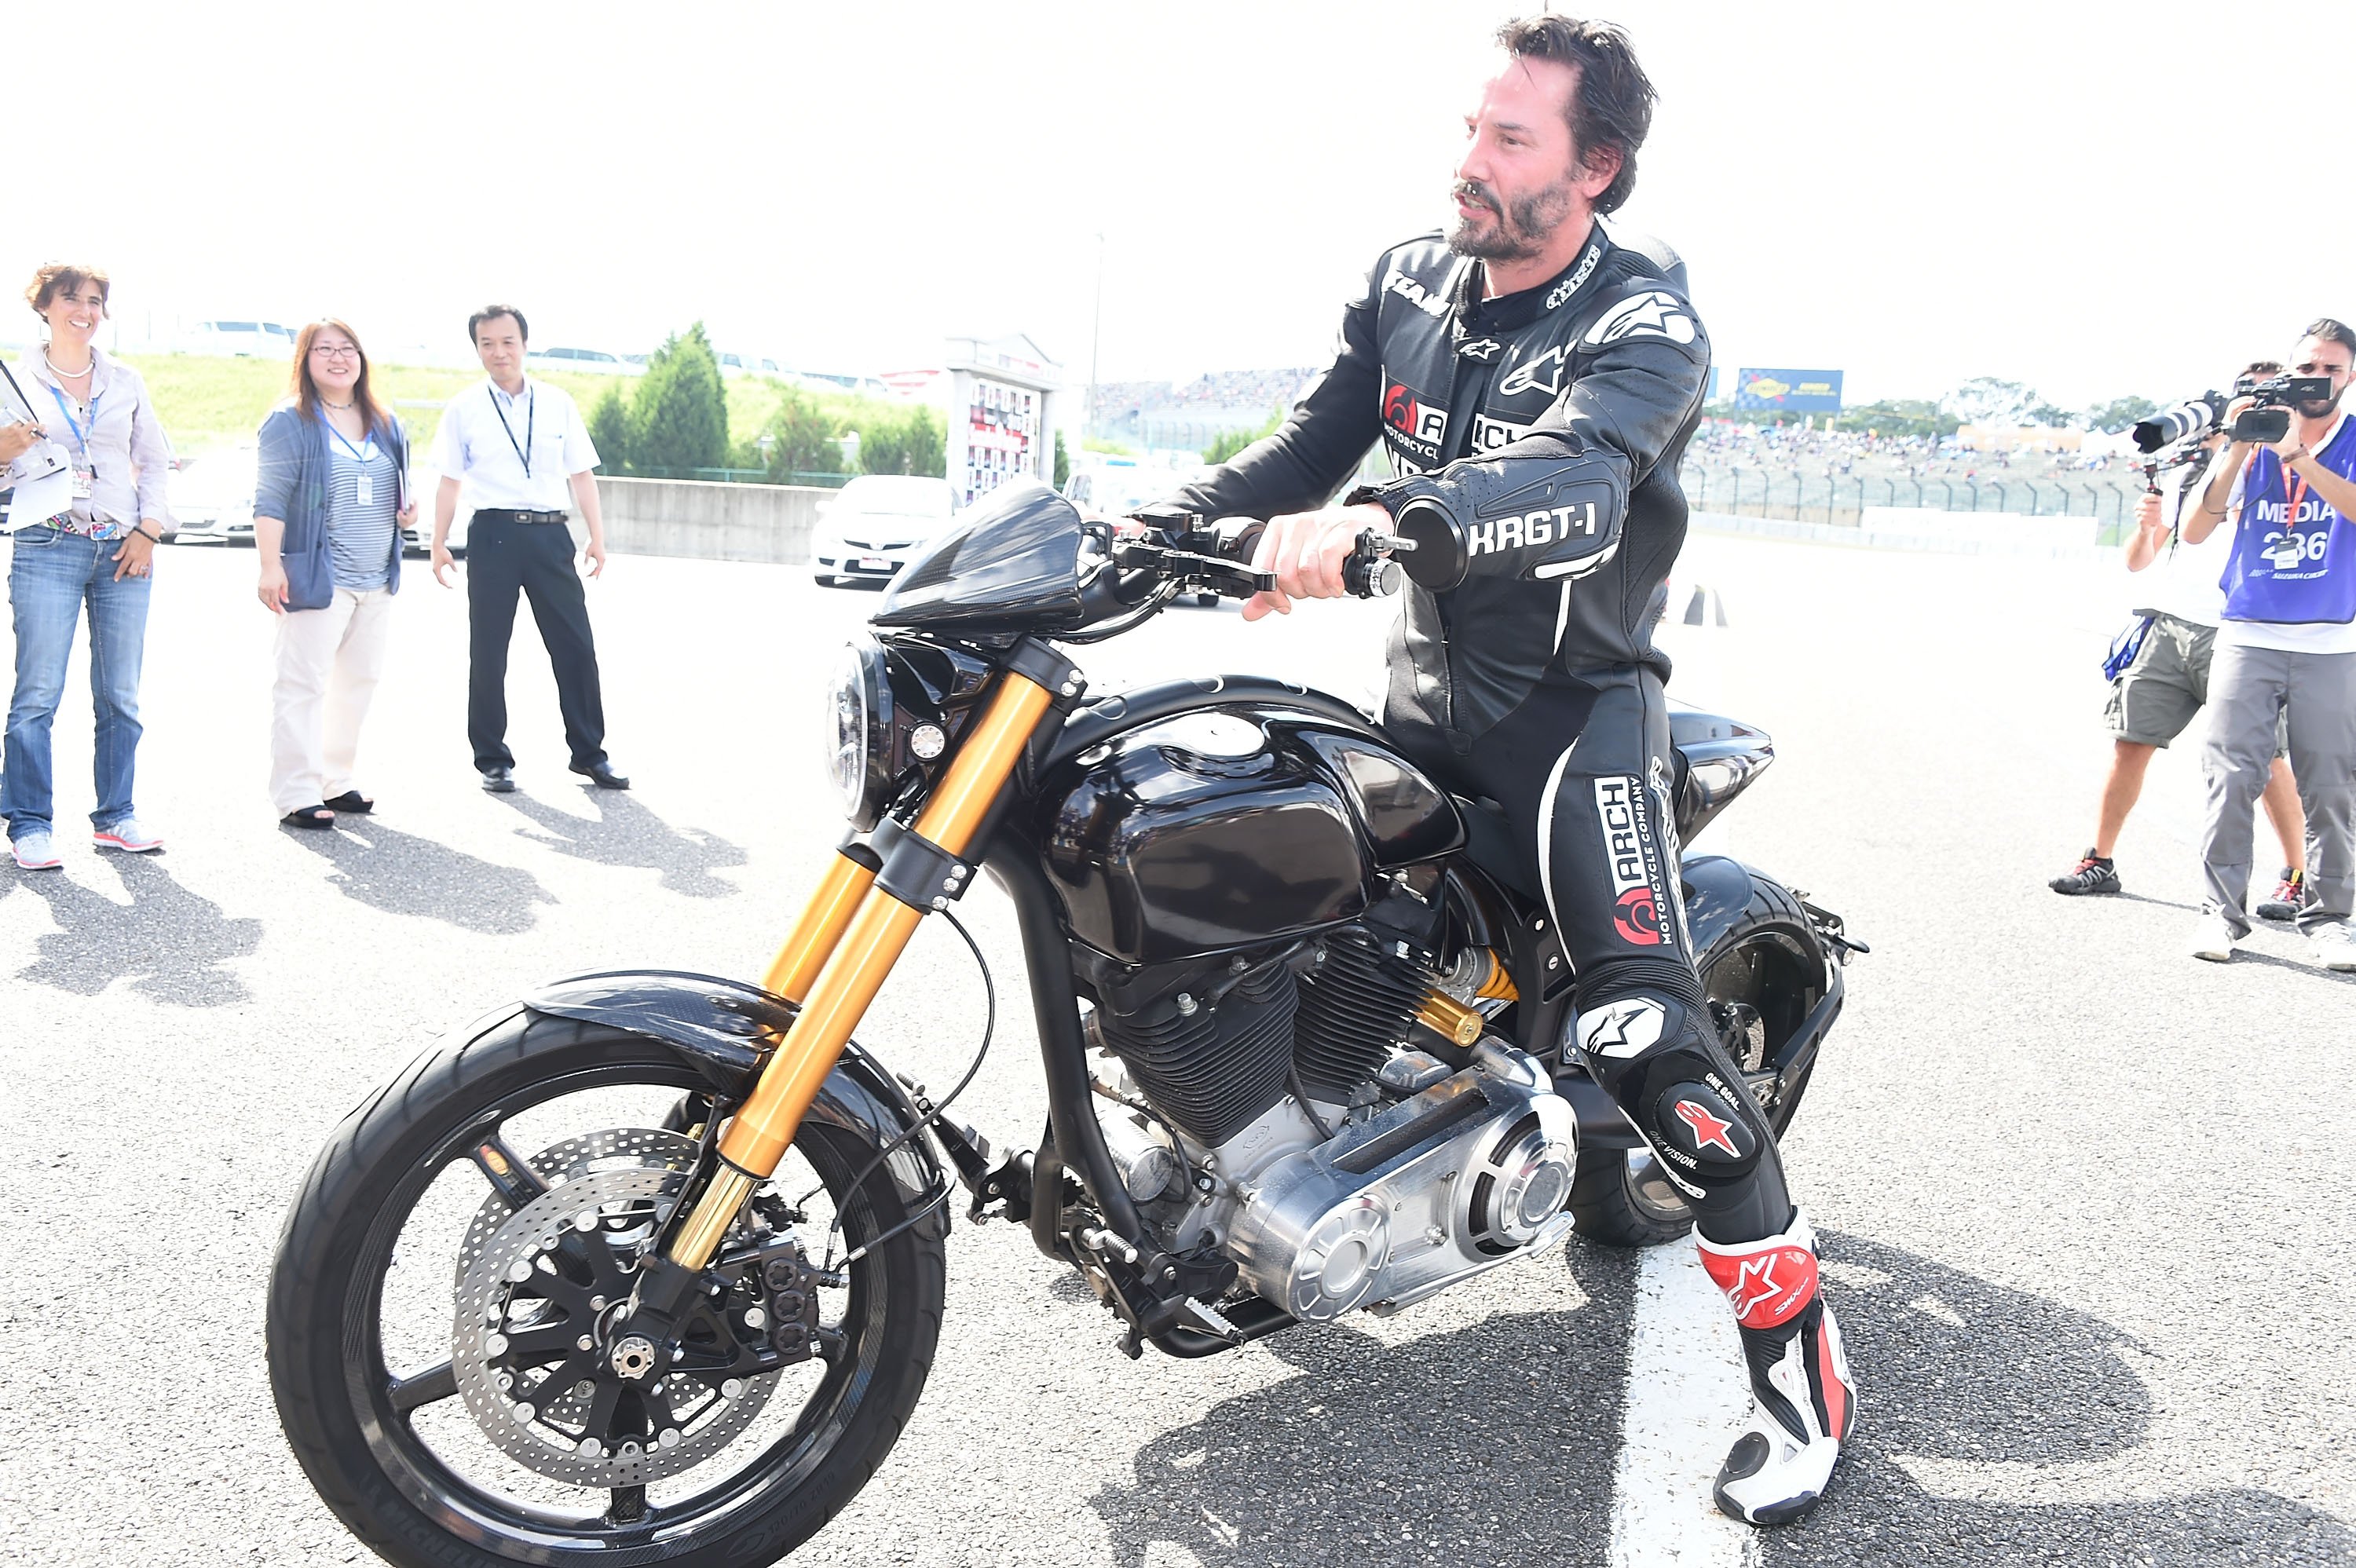 Keanu Reeves rides an Arch motorcycle